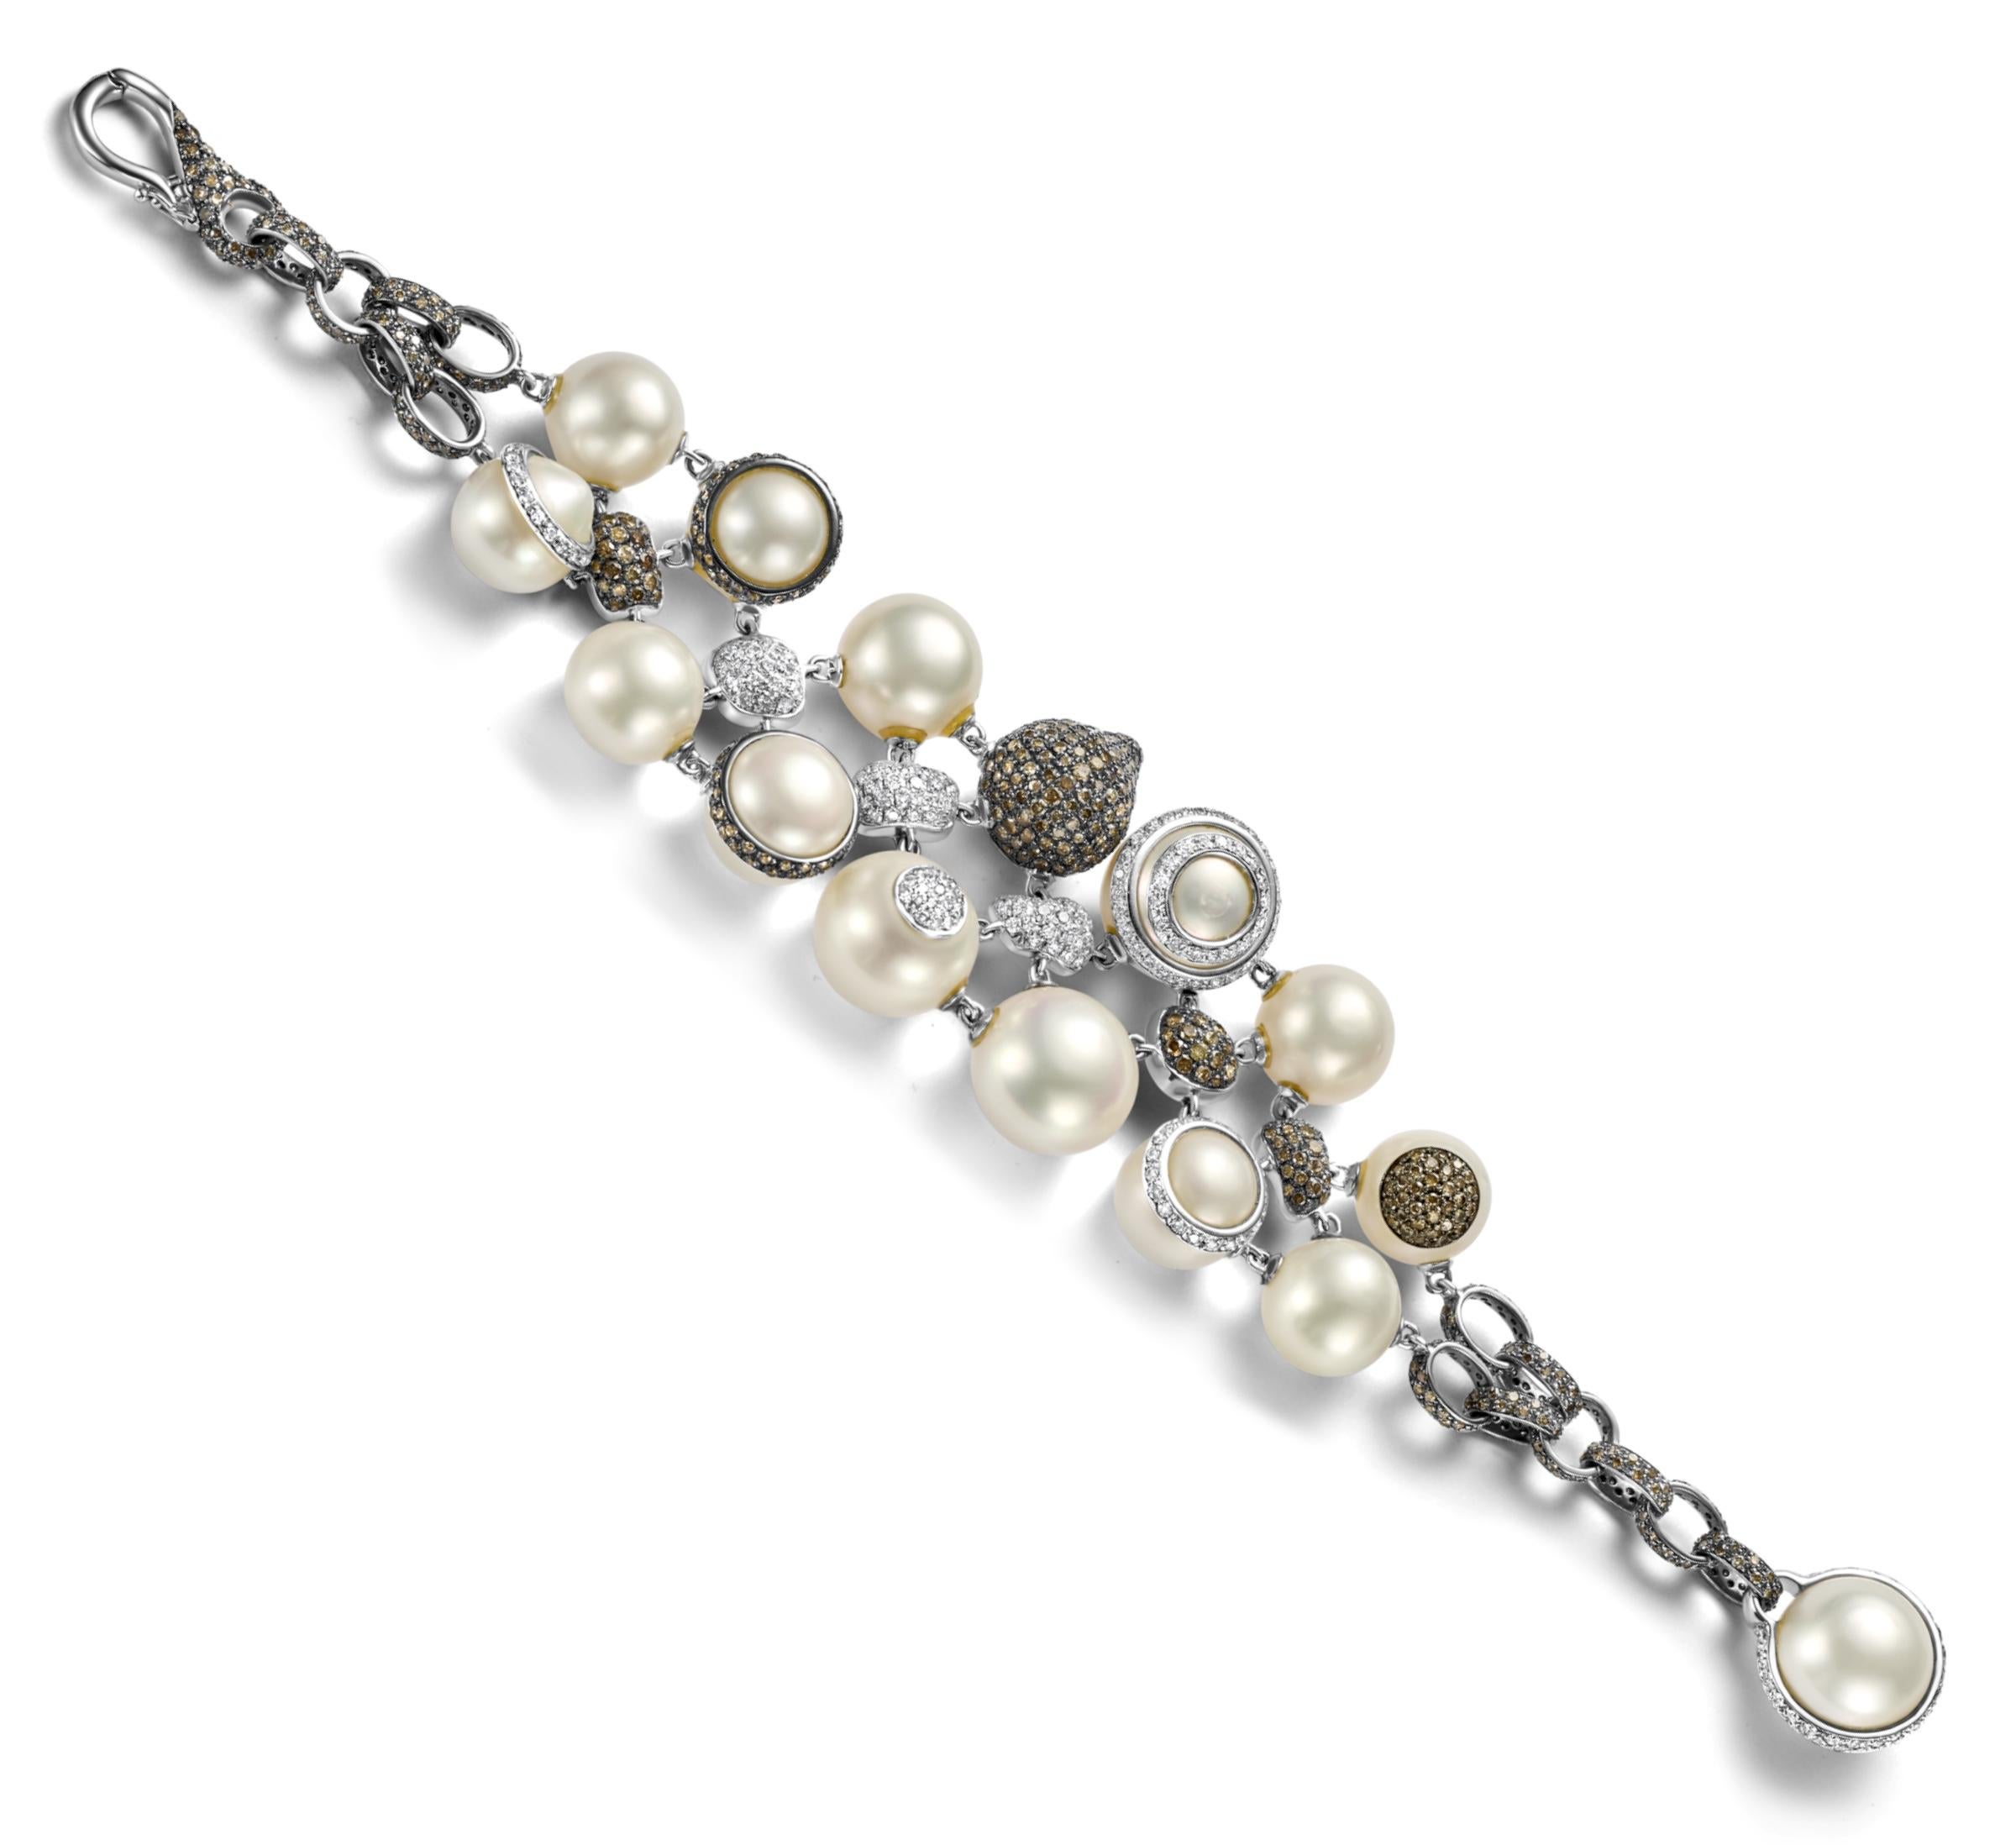 18kt White Gold Bracelet 12.6ct White & Cognac Diamonds Pearl Has Matching Ring For Sale 2